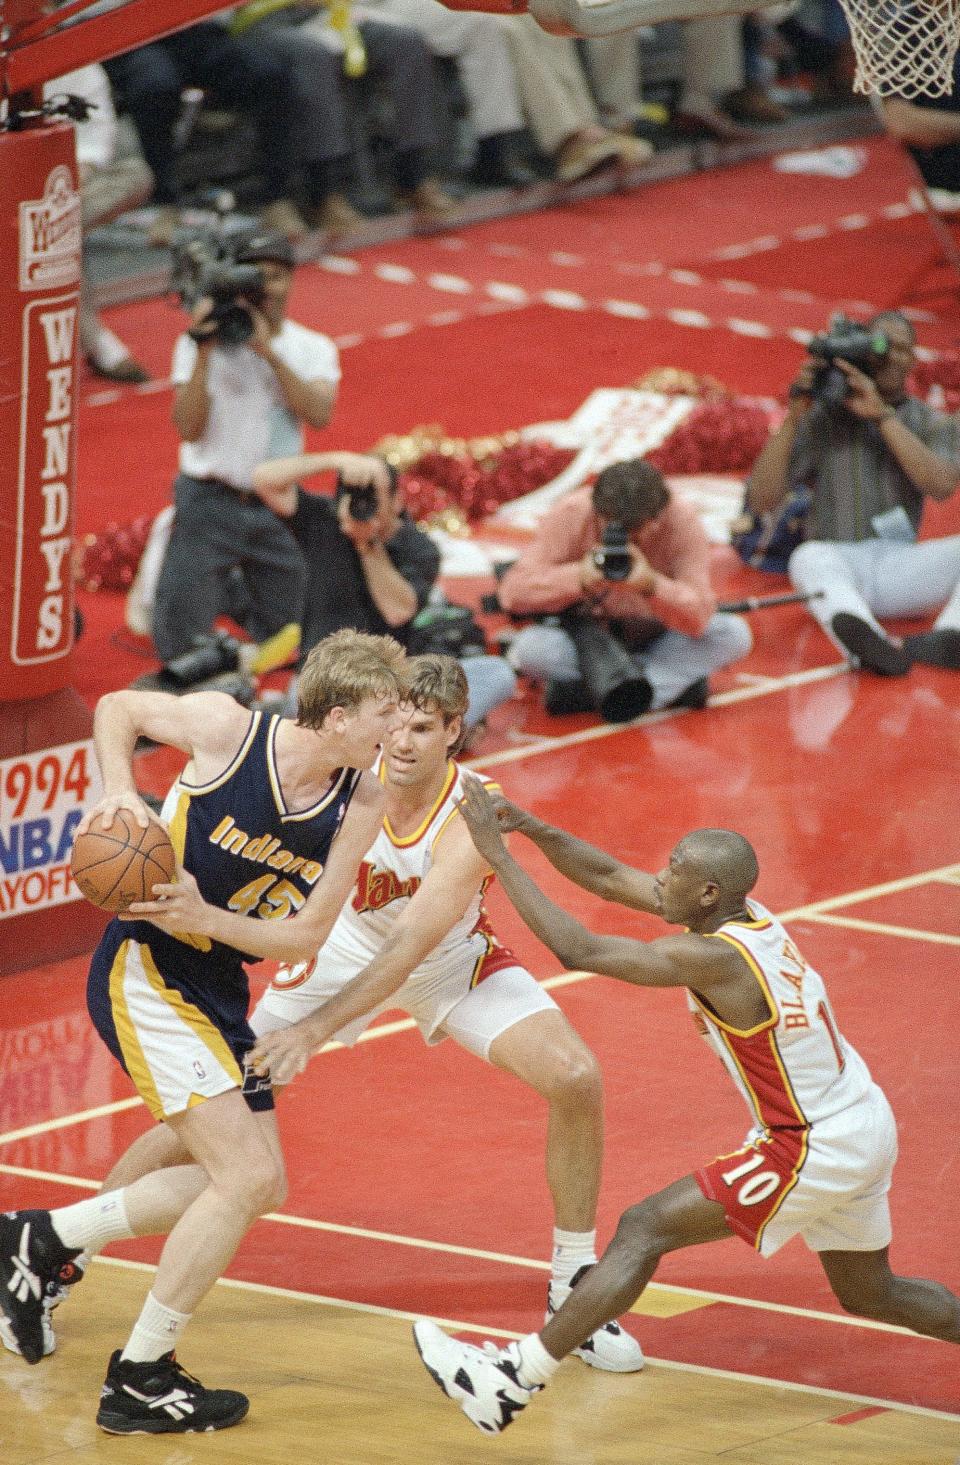 Indiana Pacers Rik Smits (45) is double-teamed by Atlanta Hawks Jon Koncak (32) and Mookie Blaylock (10) as he drives under the basket during the first half of the Eastern Conference semifinals at The Omni, Thursday, May 12, 1994, Atlanta, Ga.